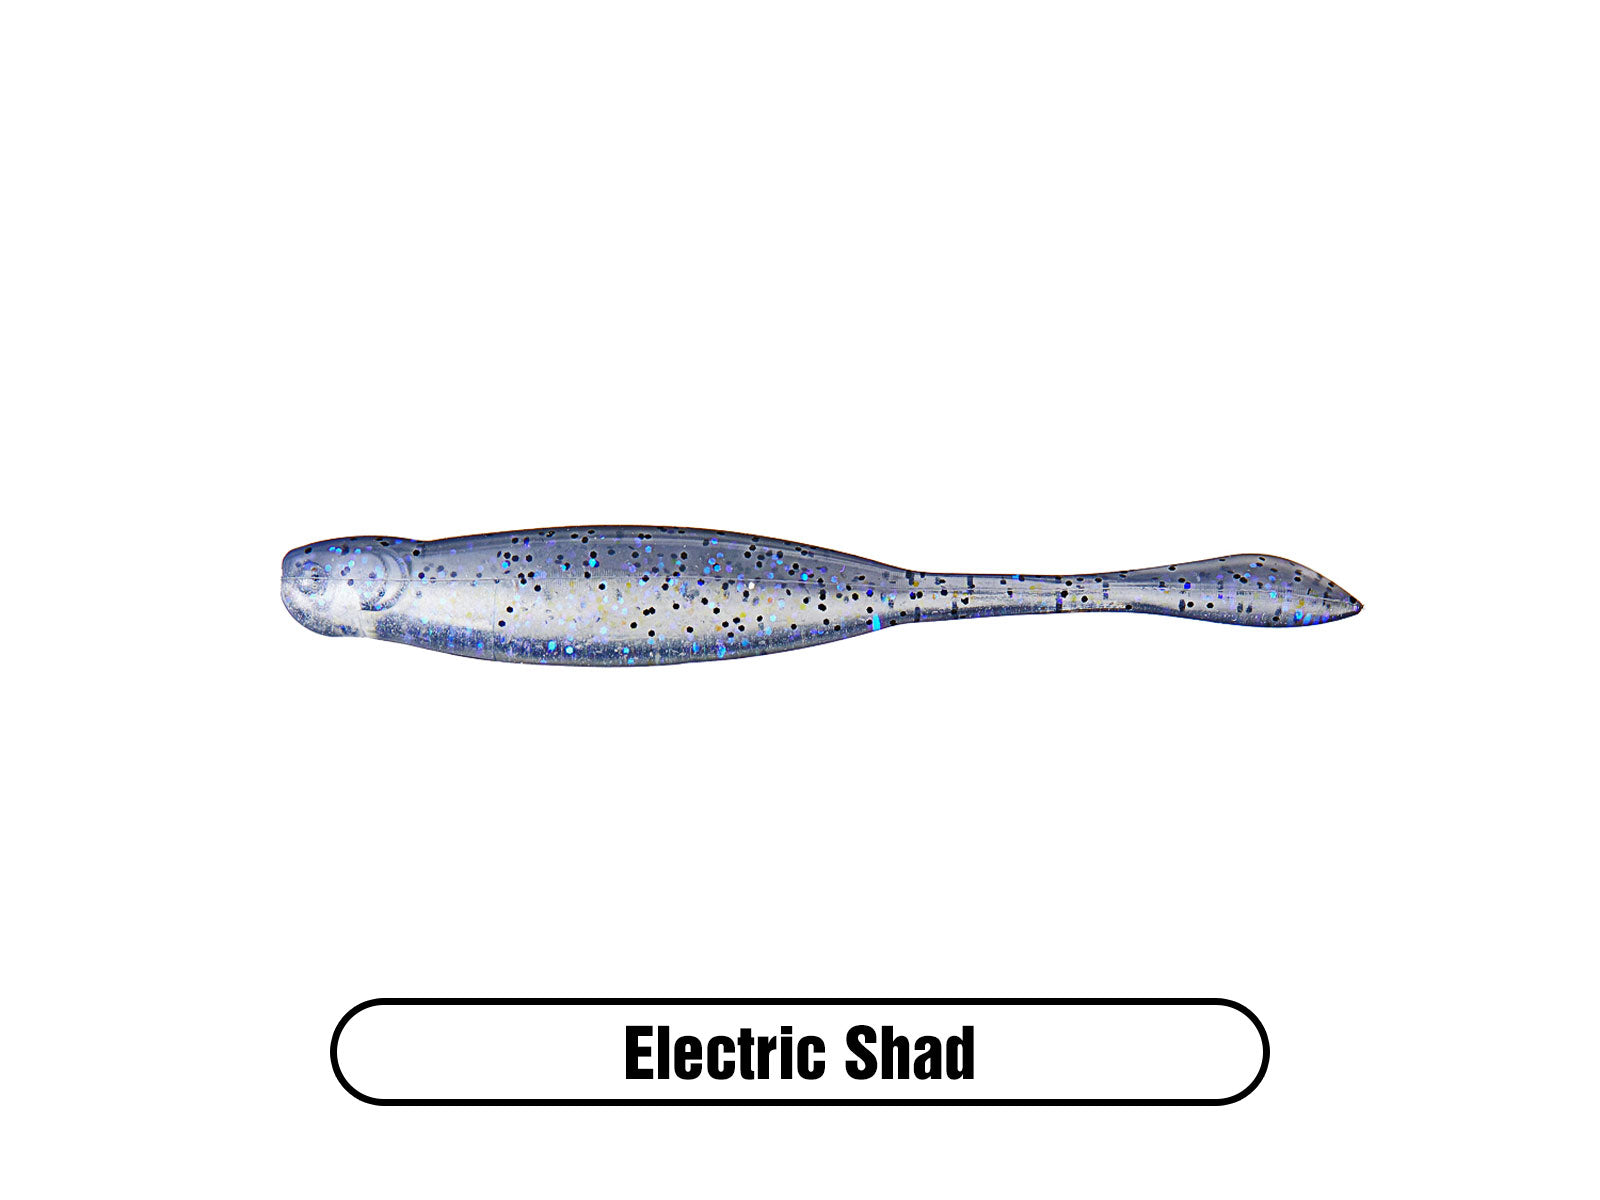 Shad Darts - 3, 6 or 12 Pack (Multiple Colors/Weights)